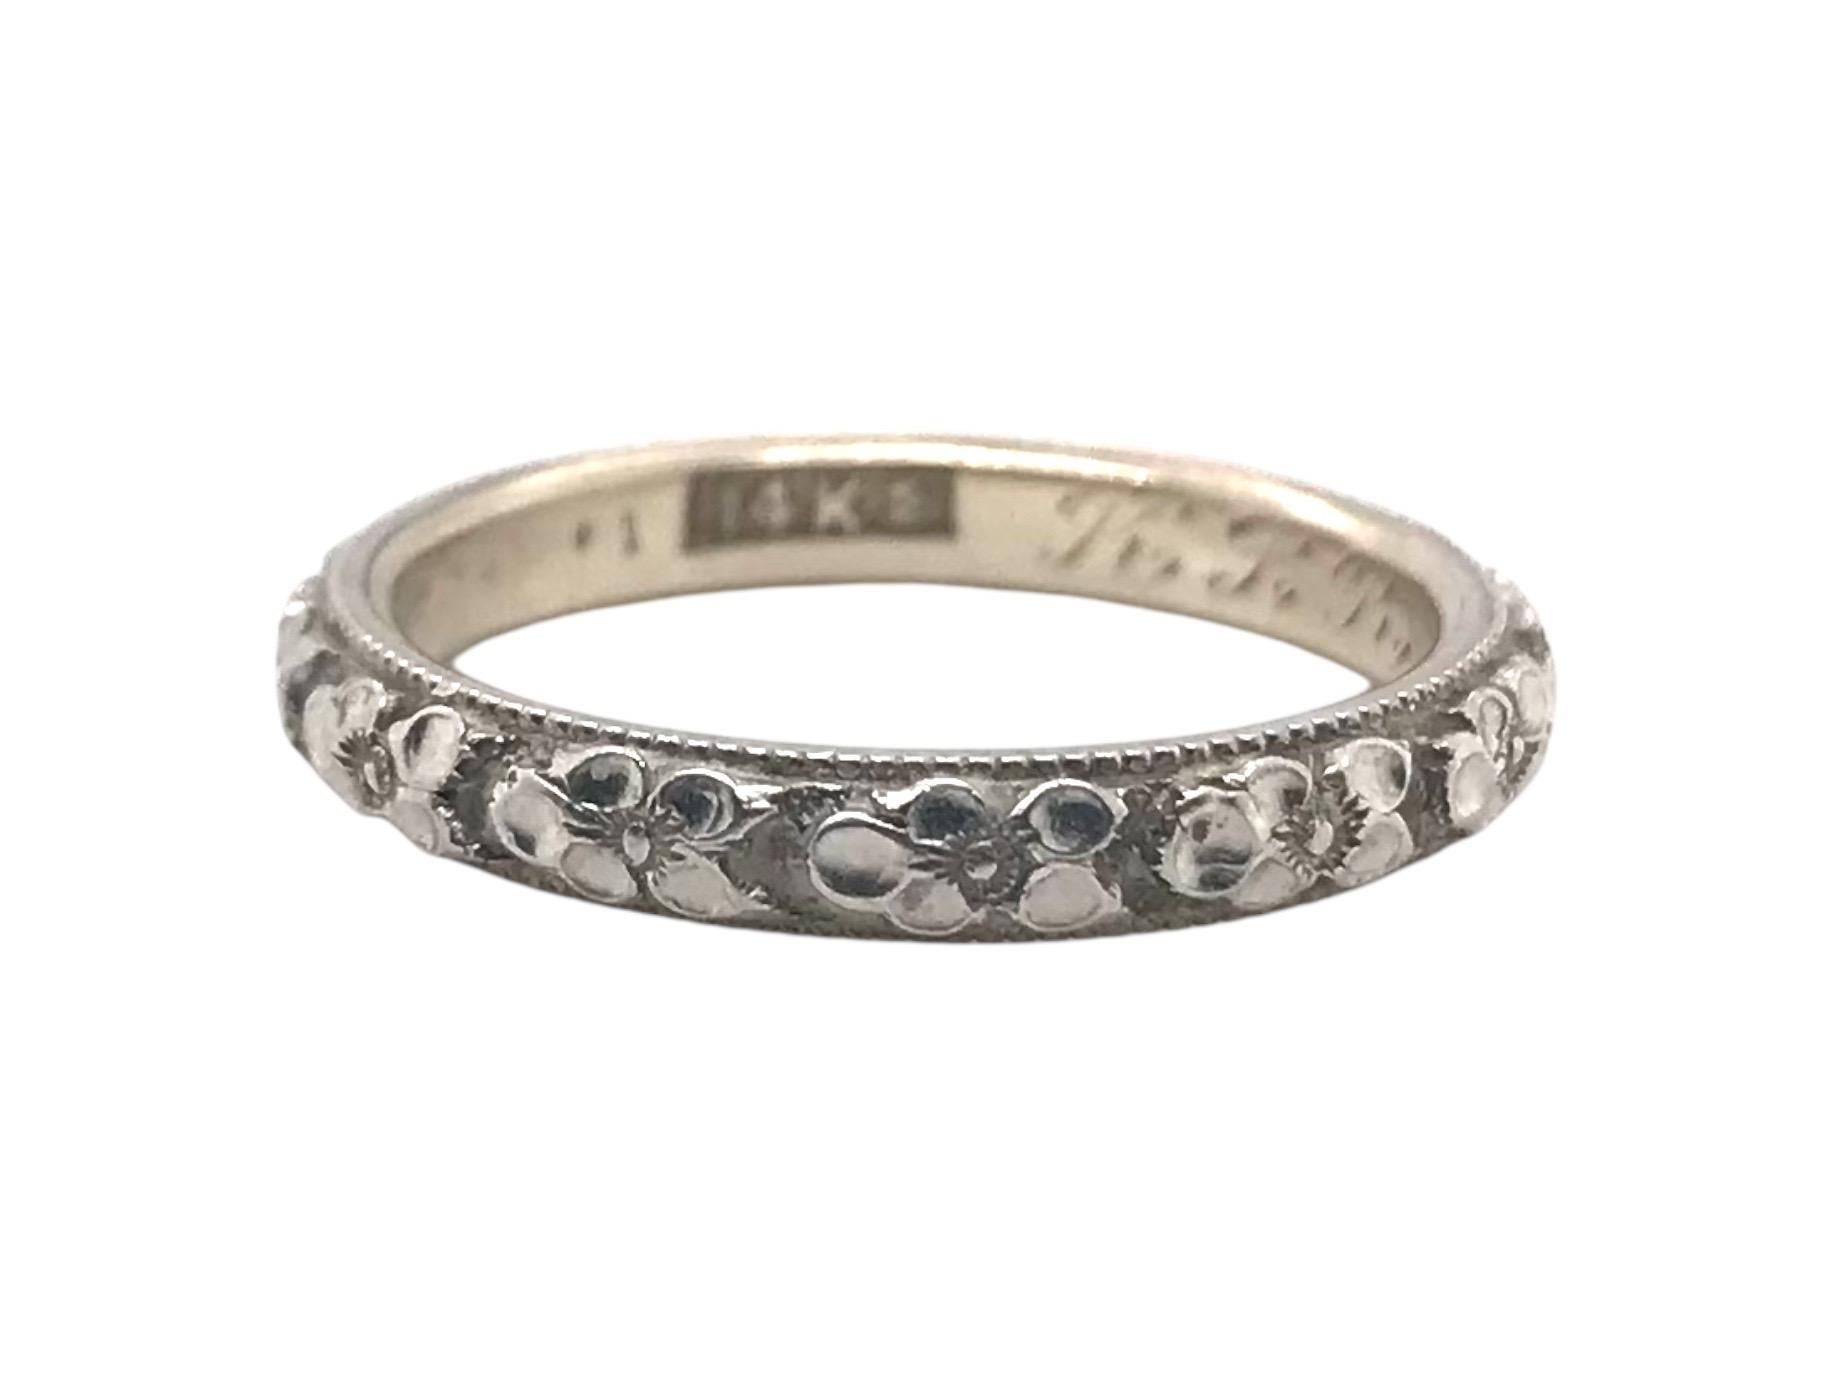 Women's Vintage Engraved 14K White Gold Wedding Band Size 5.5 For Sale